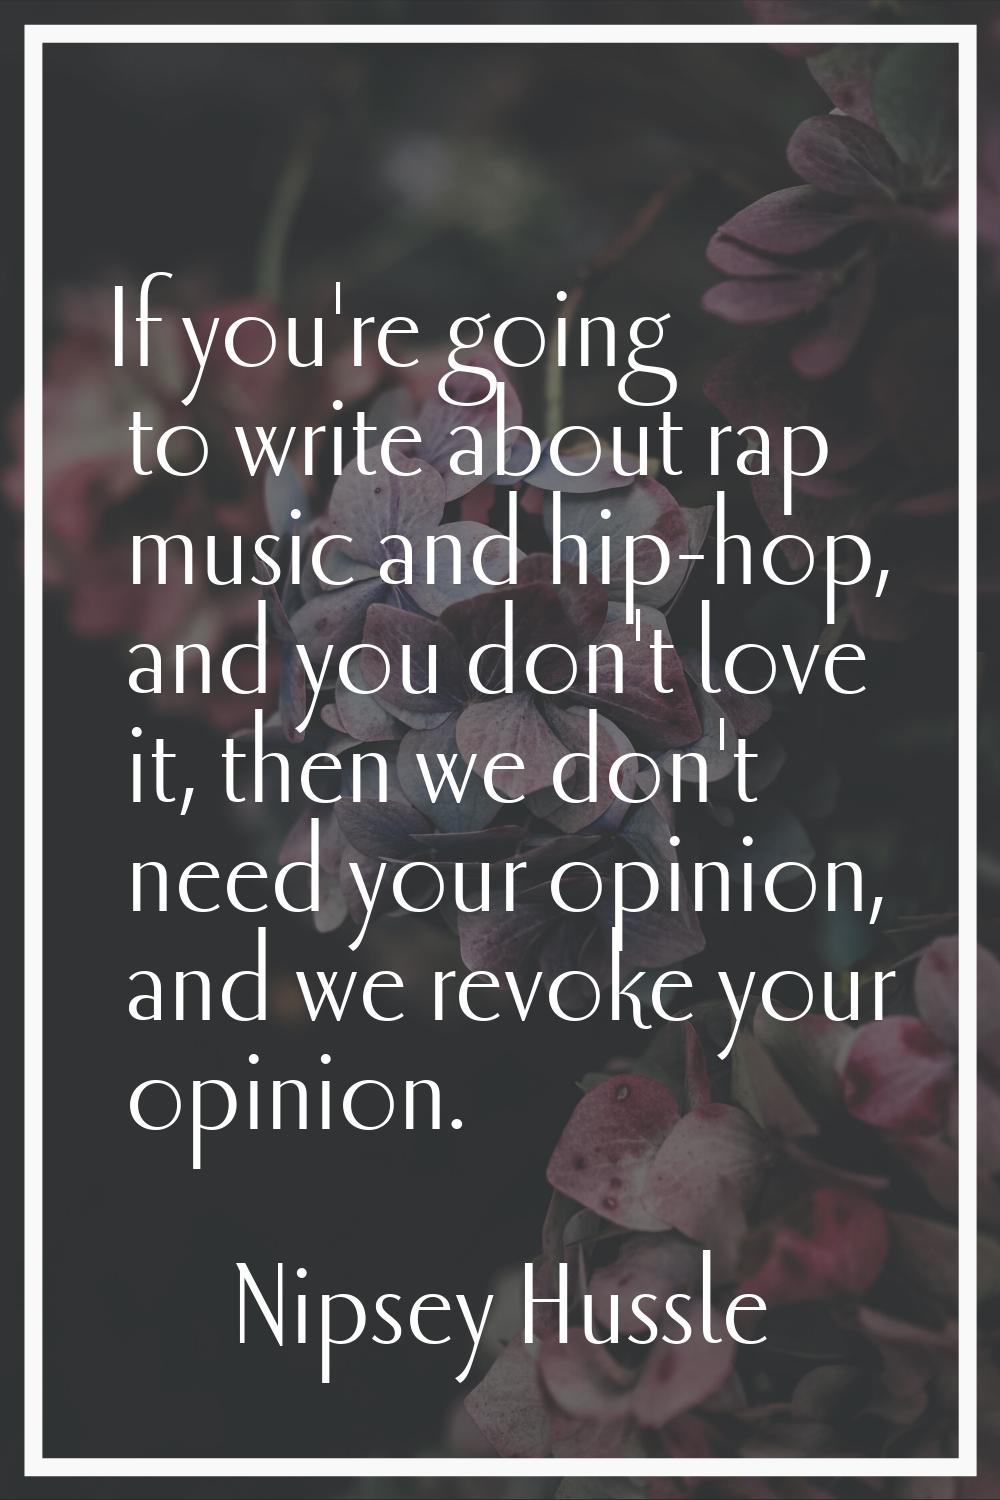 If you're going to write about rap music and hip-hop, and you don't love it, then we don't need you